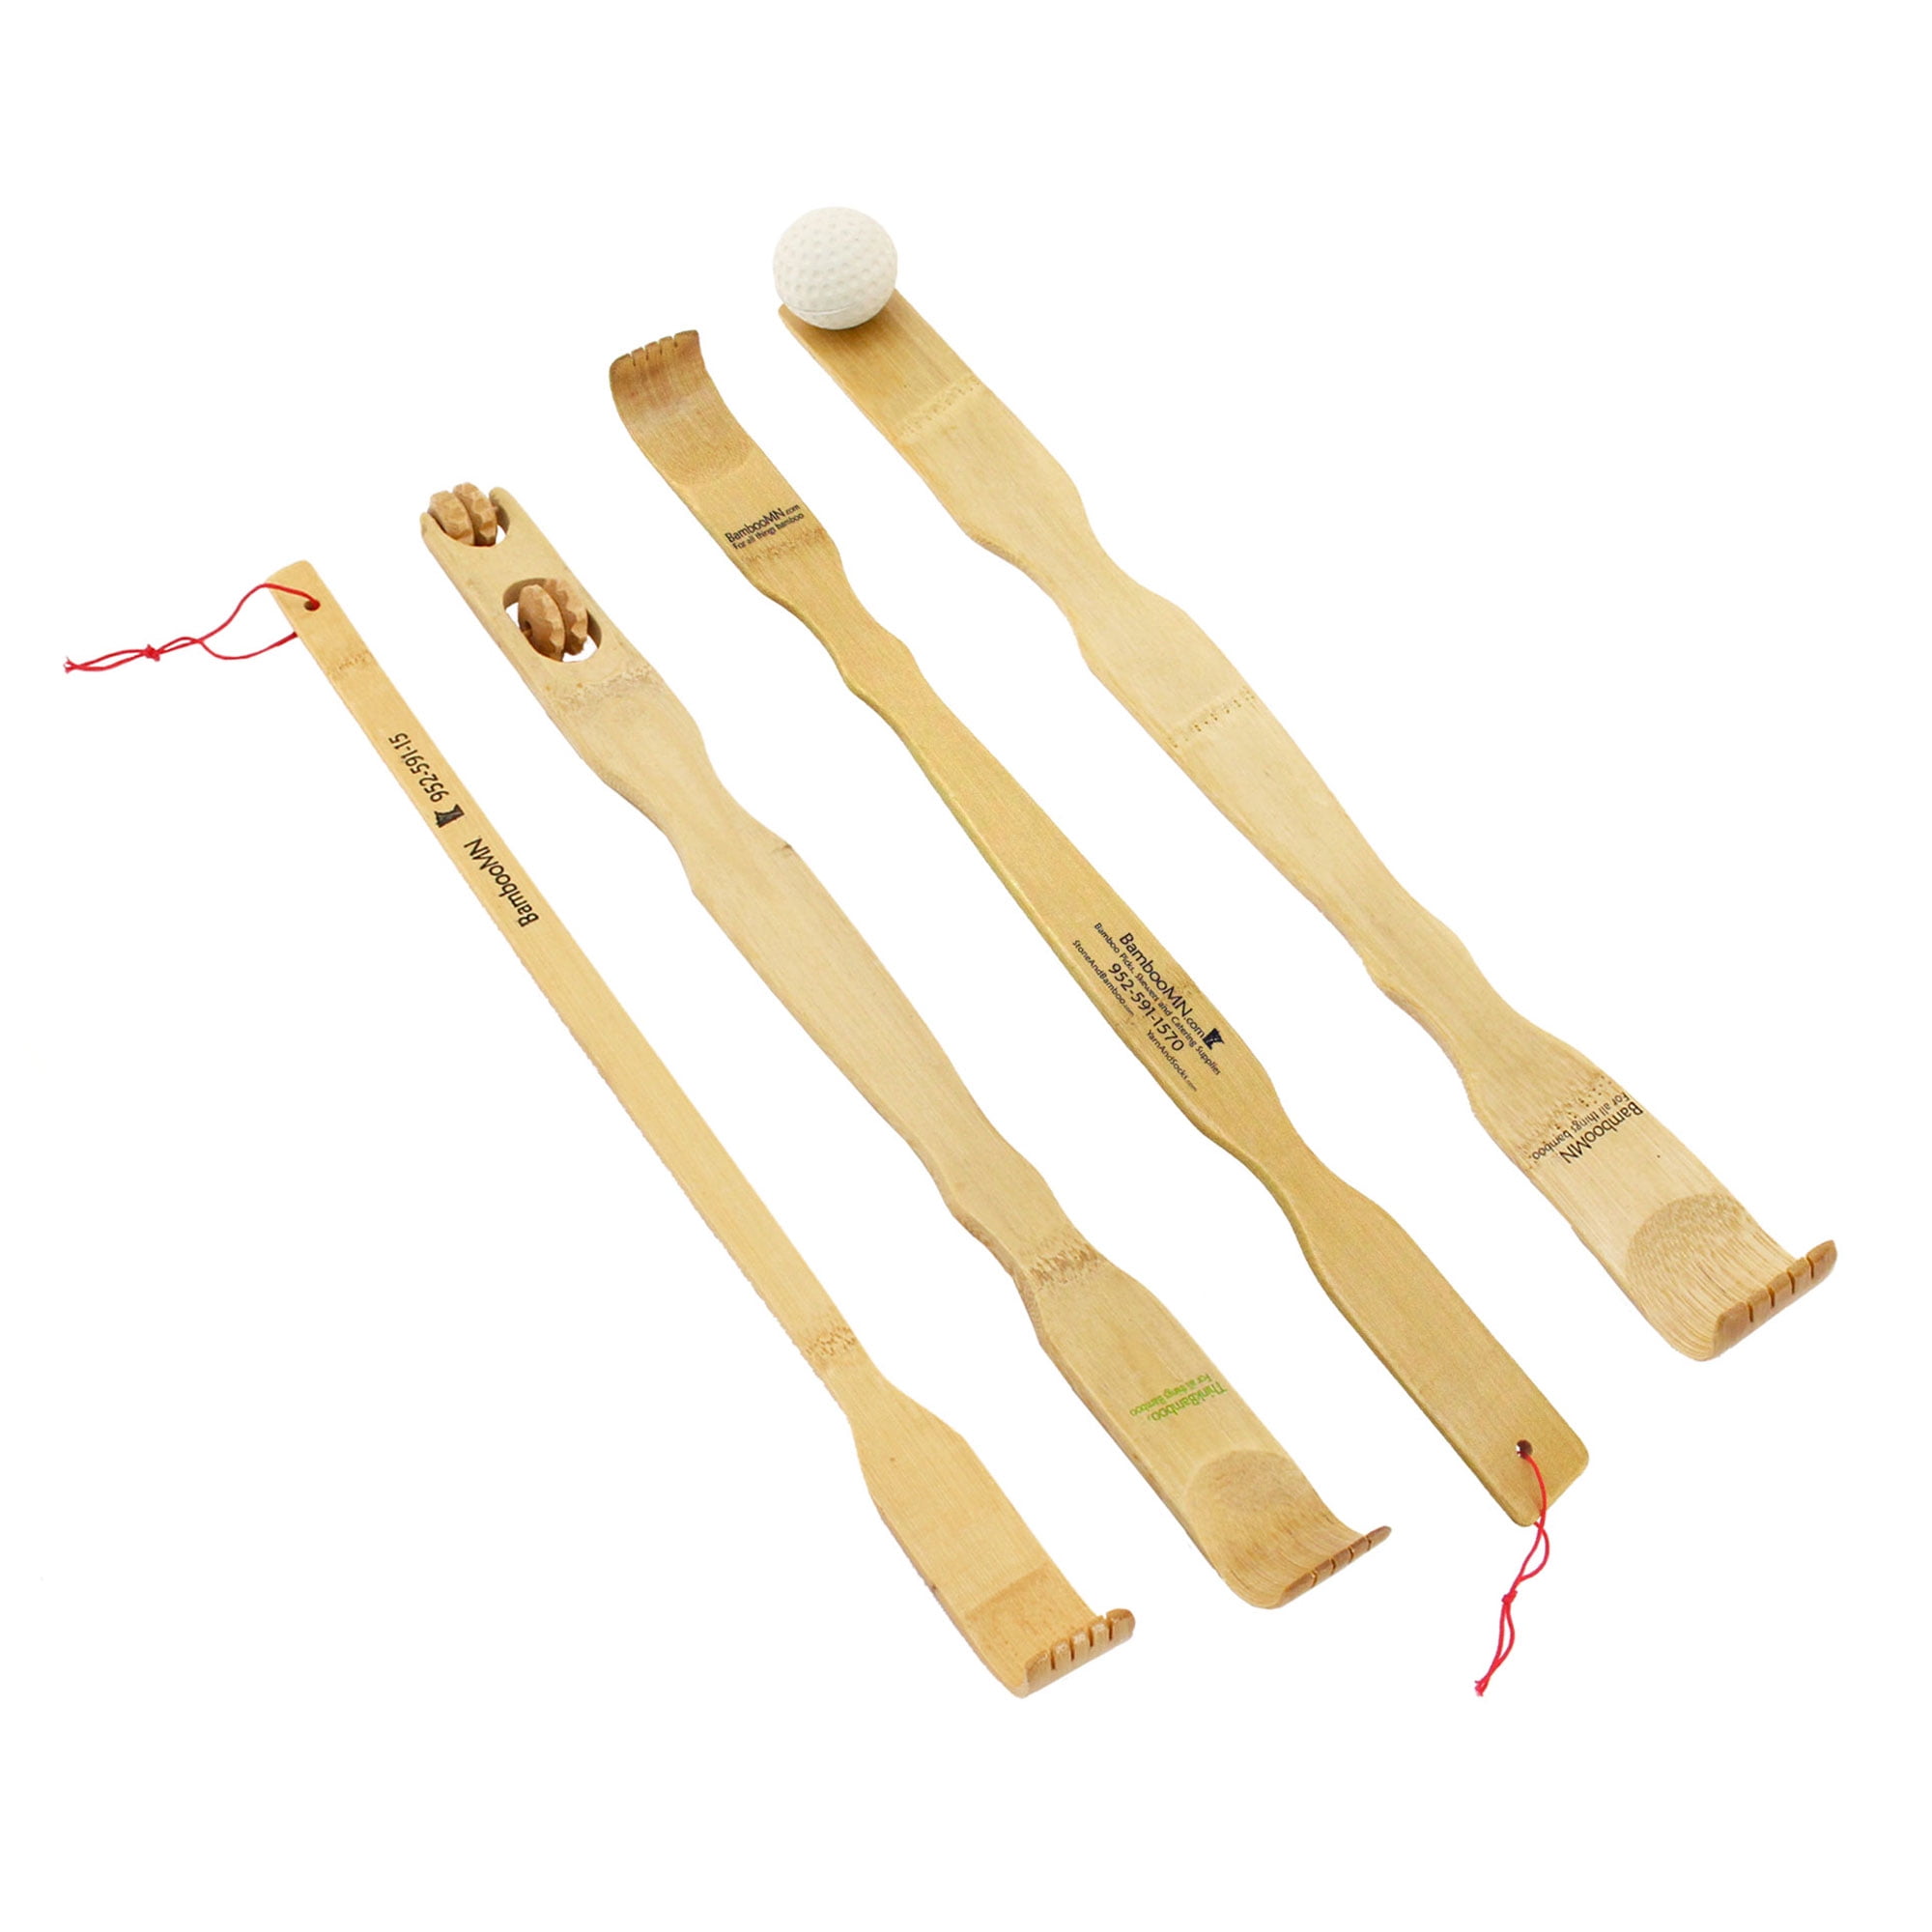 Bamboomn 4 Piece Set Traditional Back Scratcher And Body Relaxation Massager Set For Itching